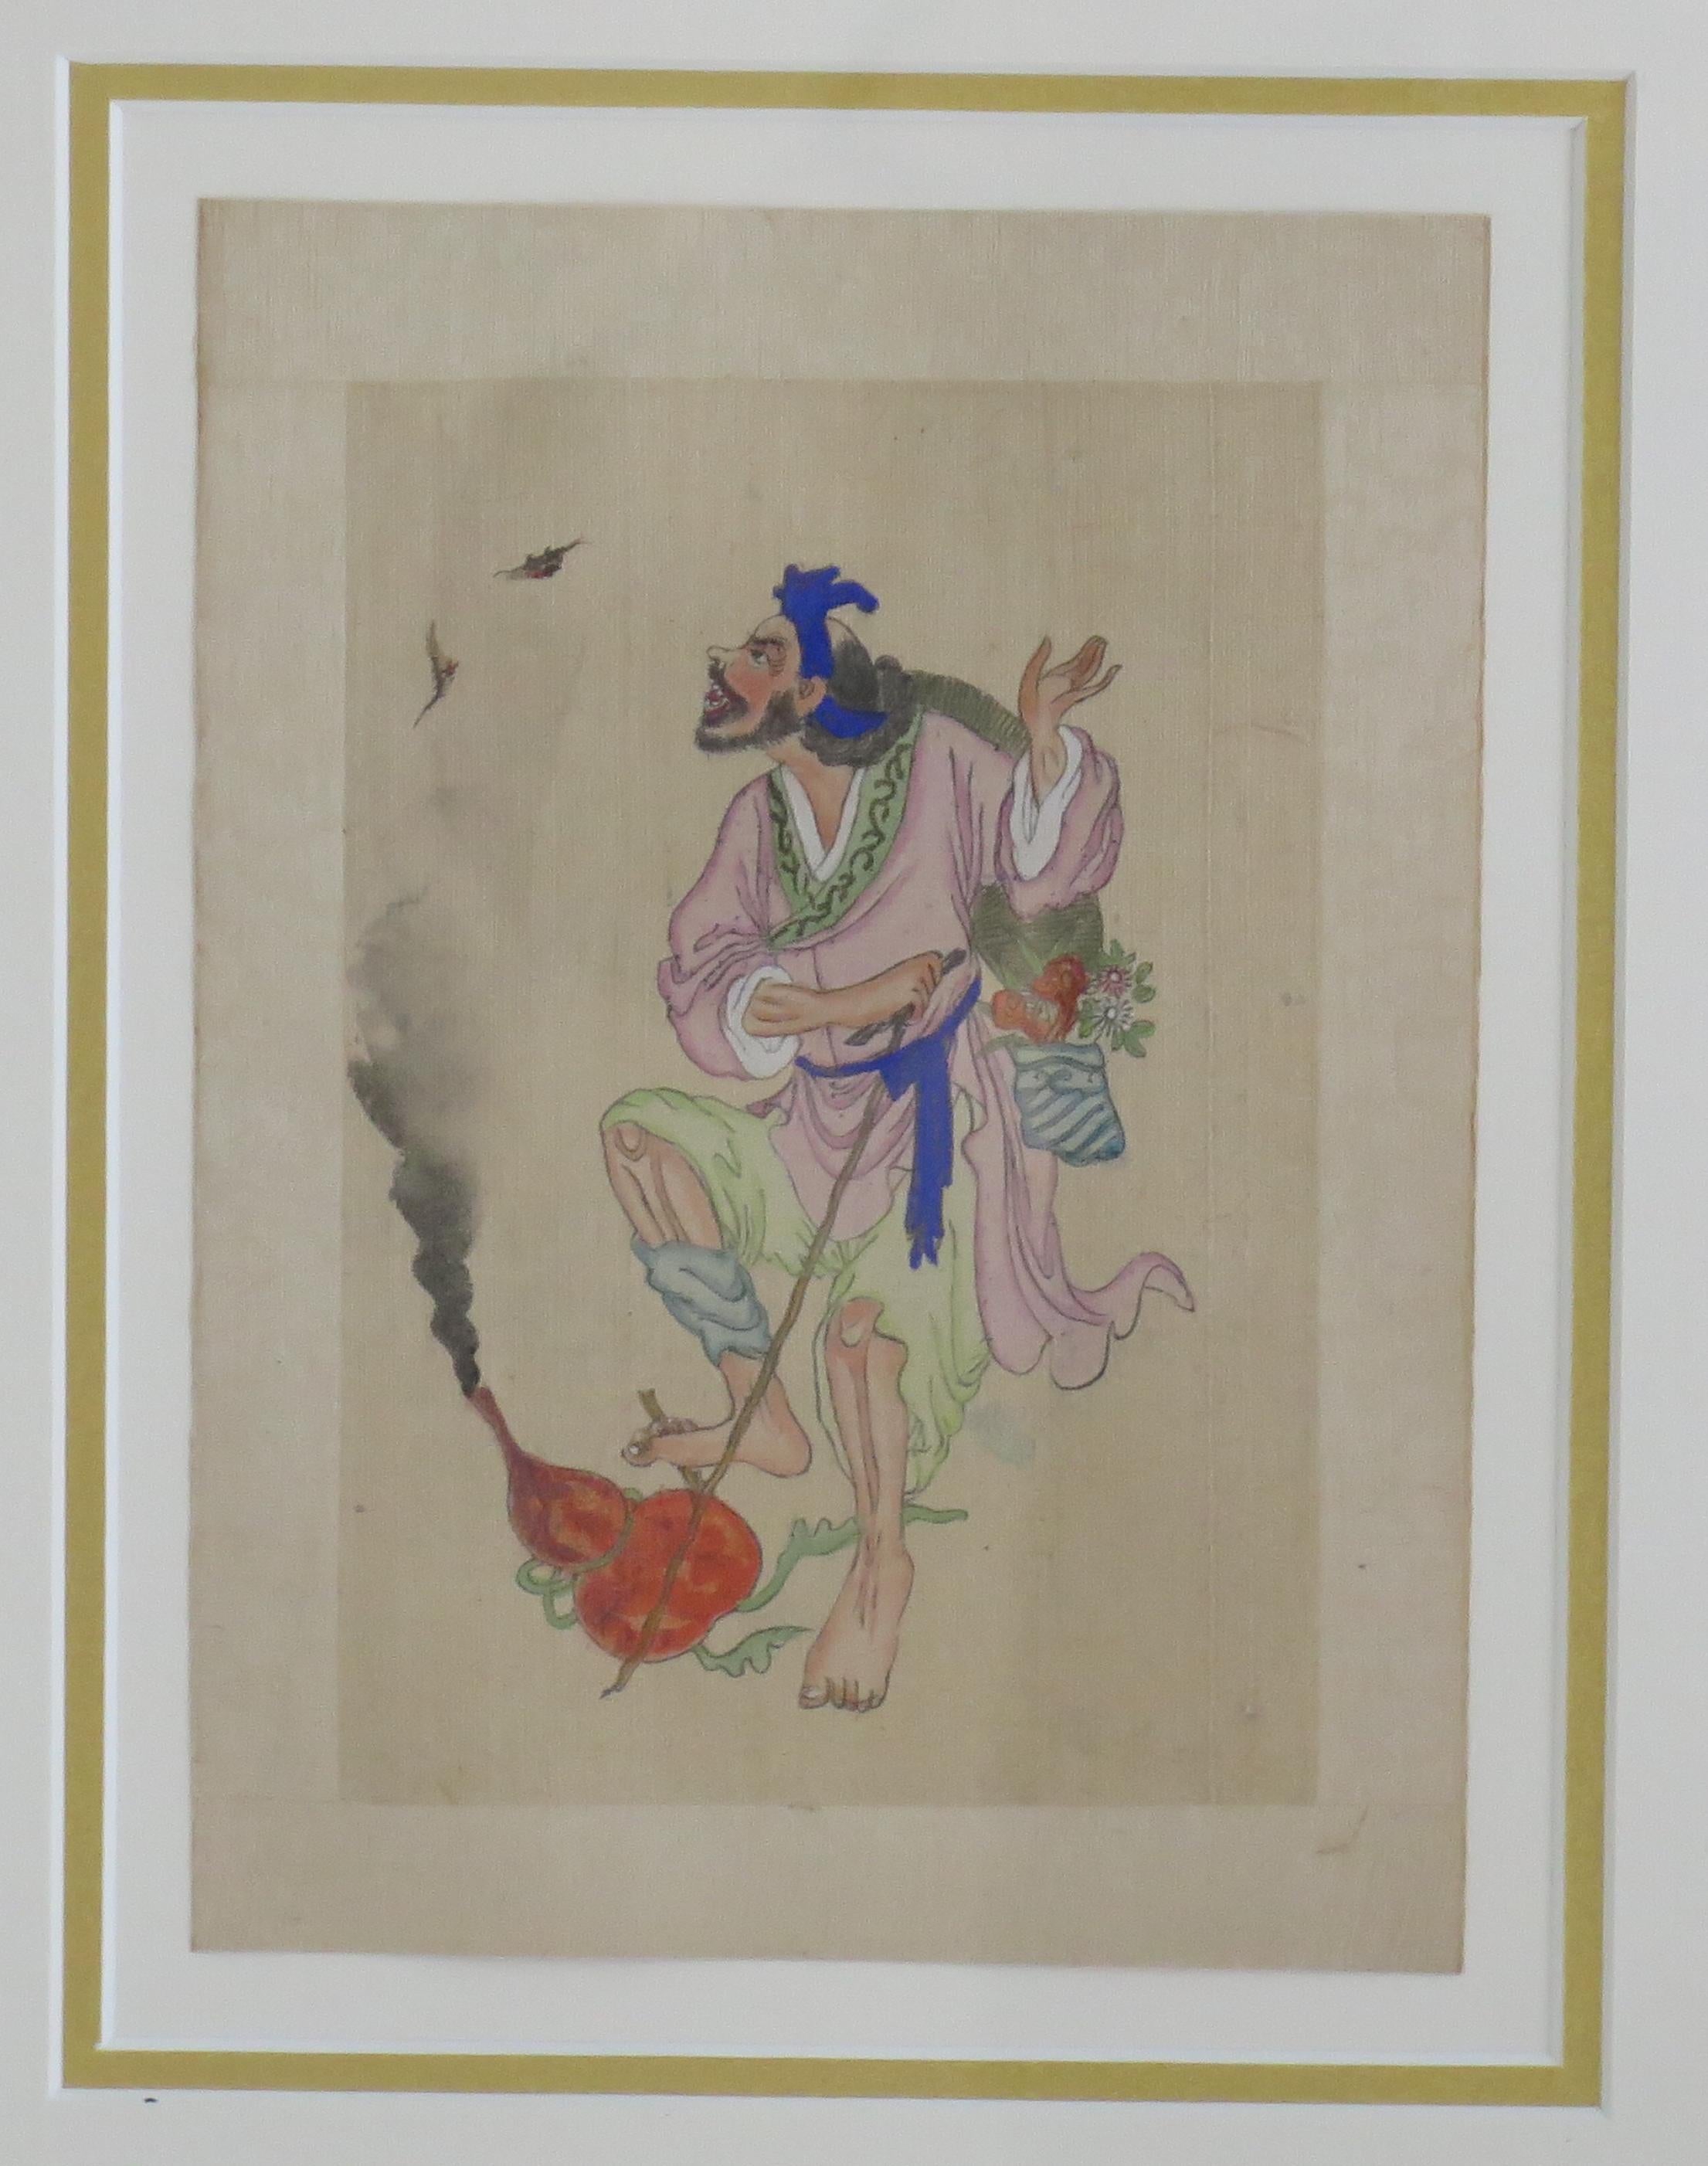 A beautifully painted Chinese water-colour from the late 19th century, circa 1900

The painting depicts one of the 